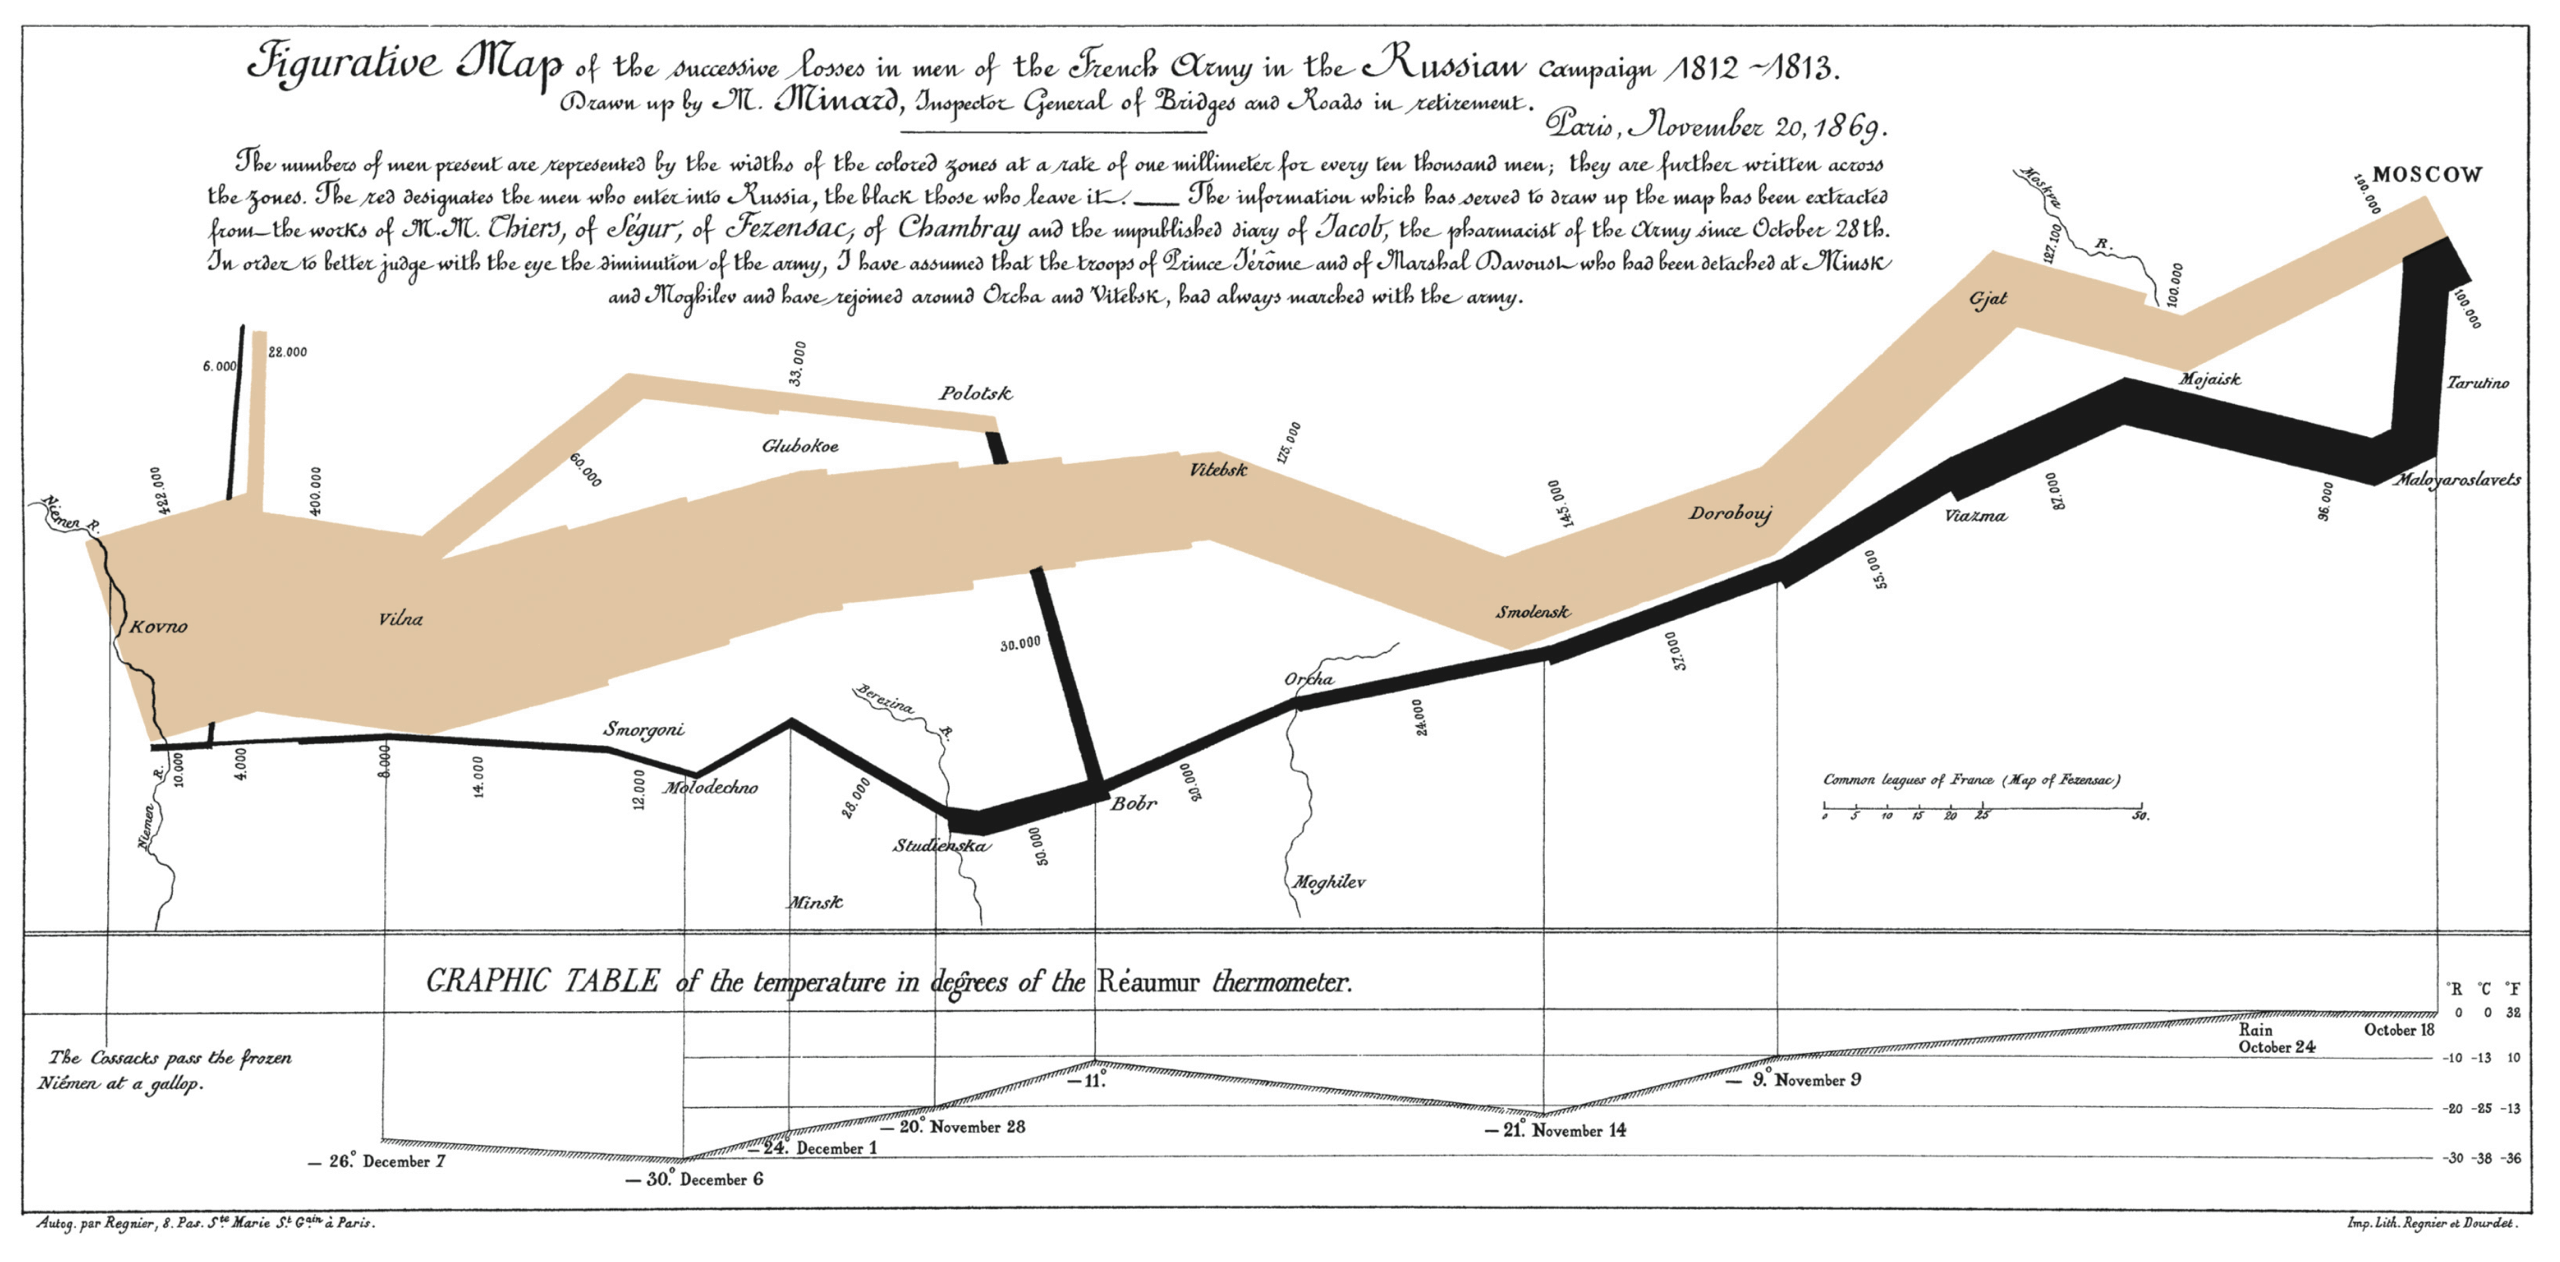 Figurative map of the successive losses of the French Army in the Russian campaign, 1812-1813